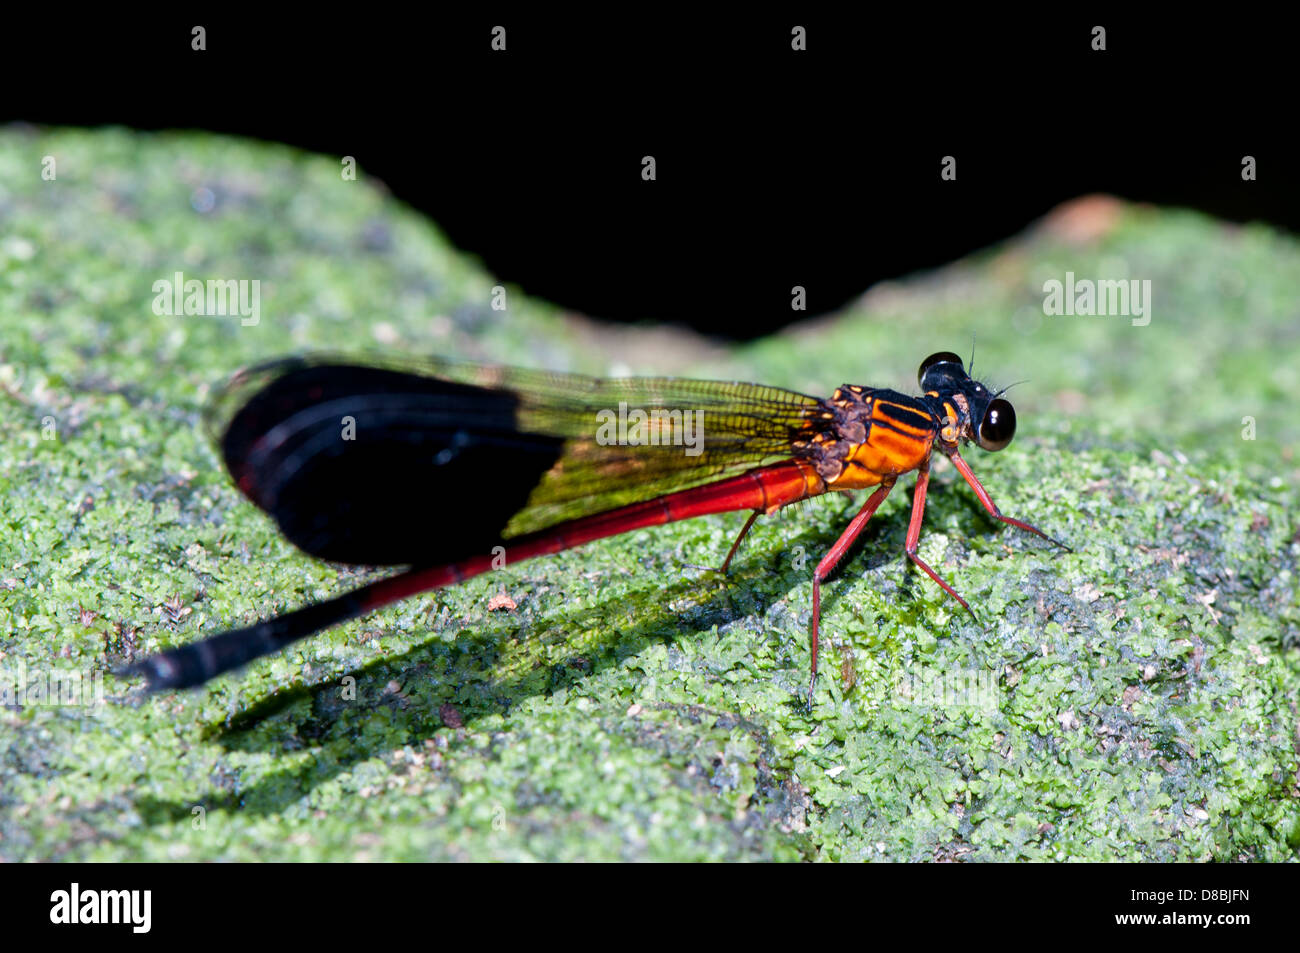 Large red damselfly adult, side view Stock Photo